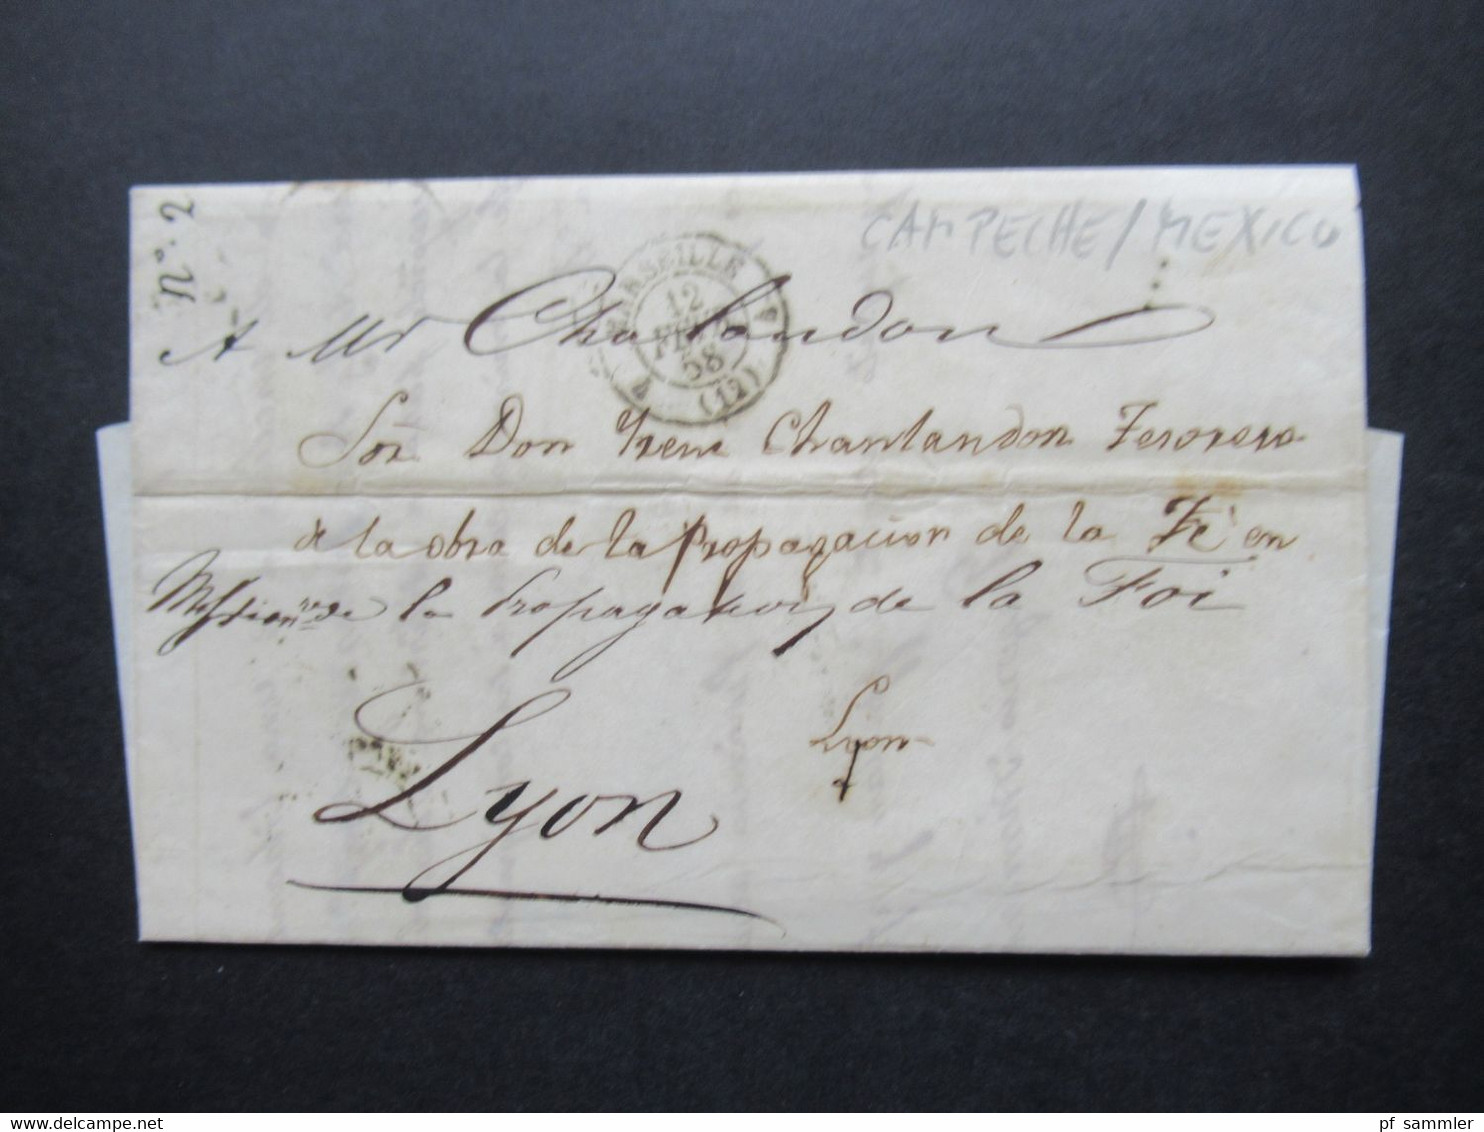 Forwarded Letter / Forwarder 1858 Campeche Mexico -Lyon Via Marseille Blauer Stp. Forwarded By Rabaud Brothers Marseille - Messico